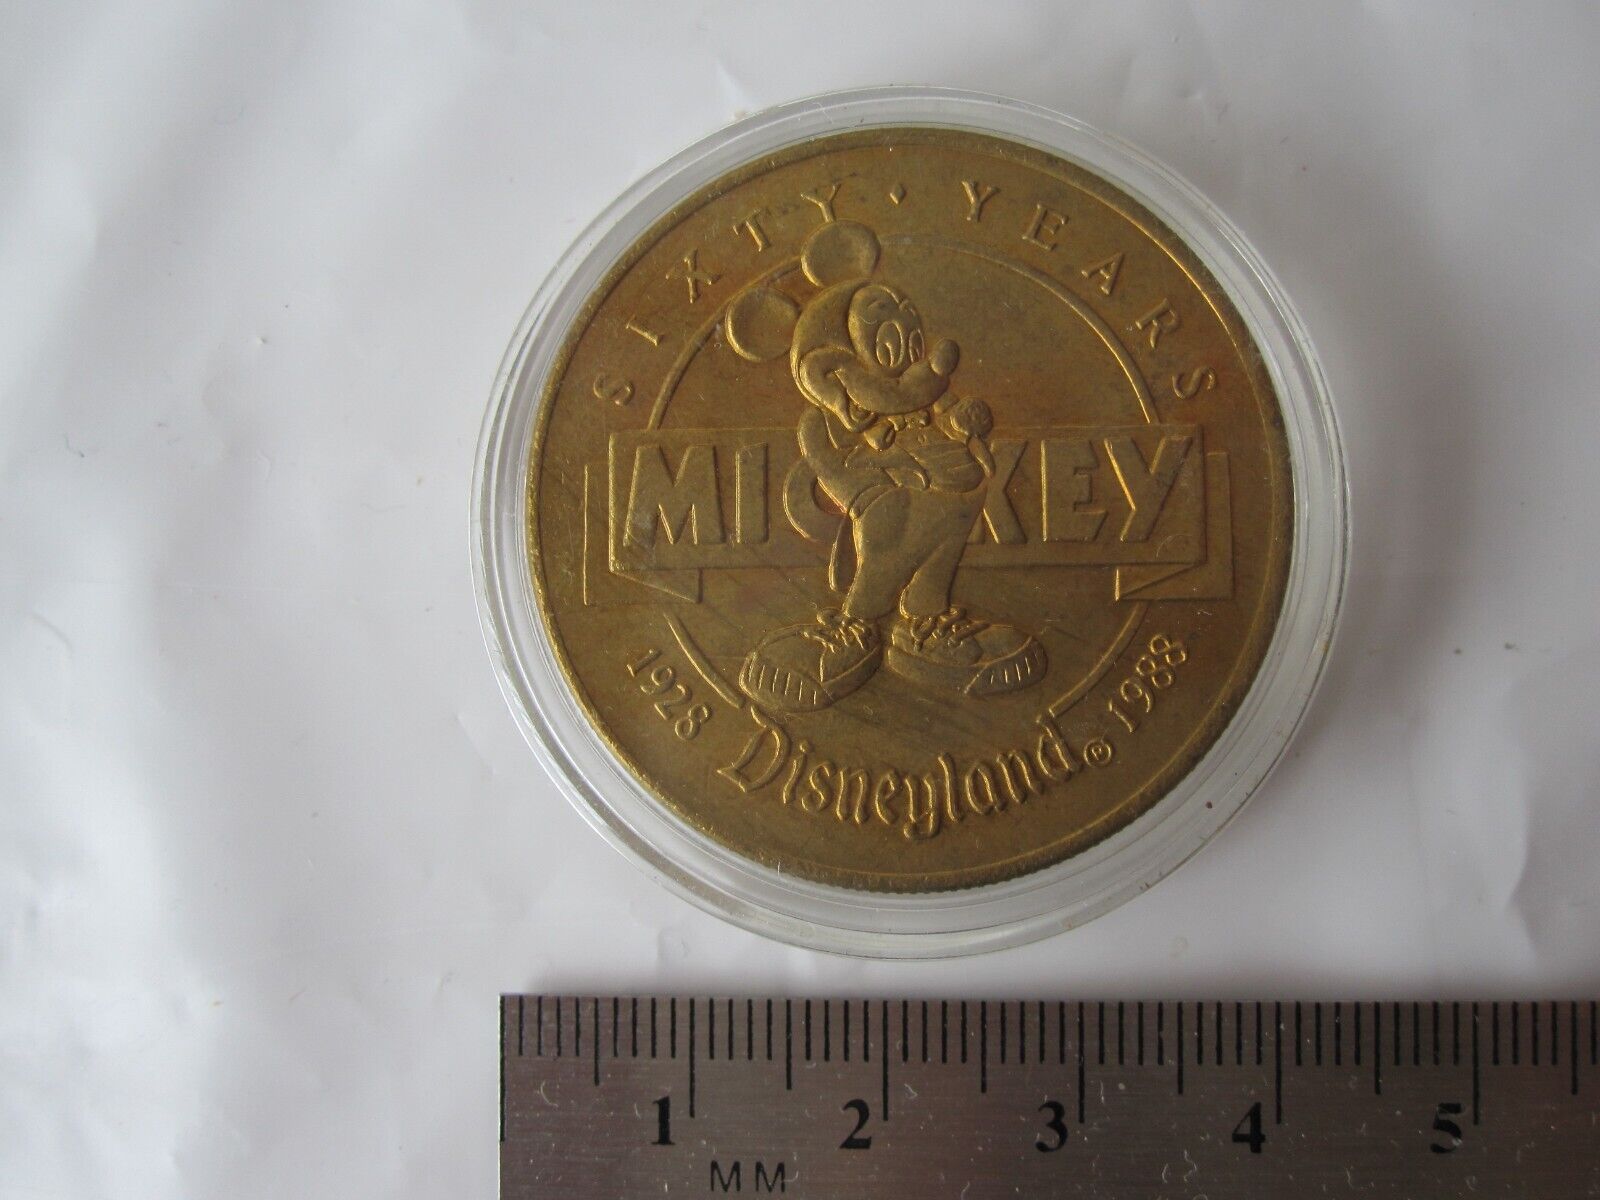 Disneyland 60 Sixty Years 1928-1988 Mickey Mouse Commemorative Coin in case